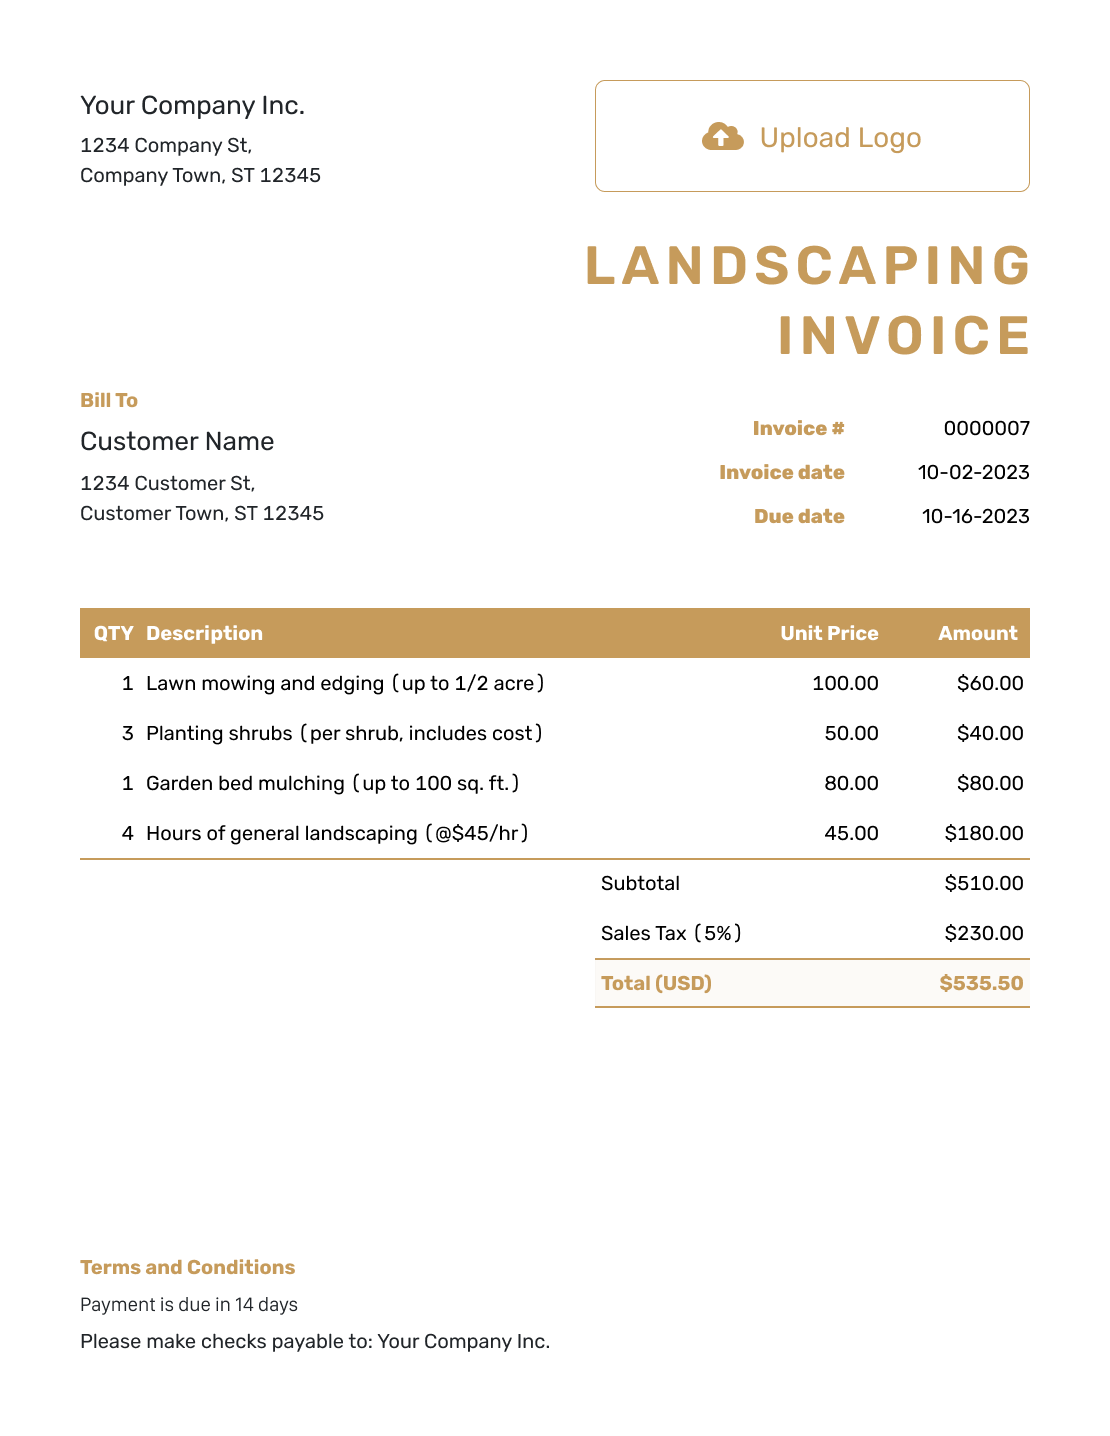 Basic Landscaping Invoice Template